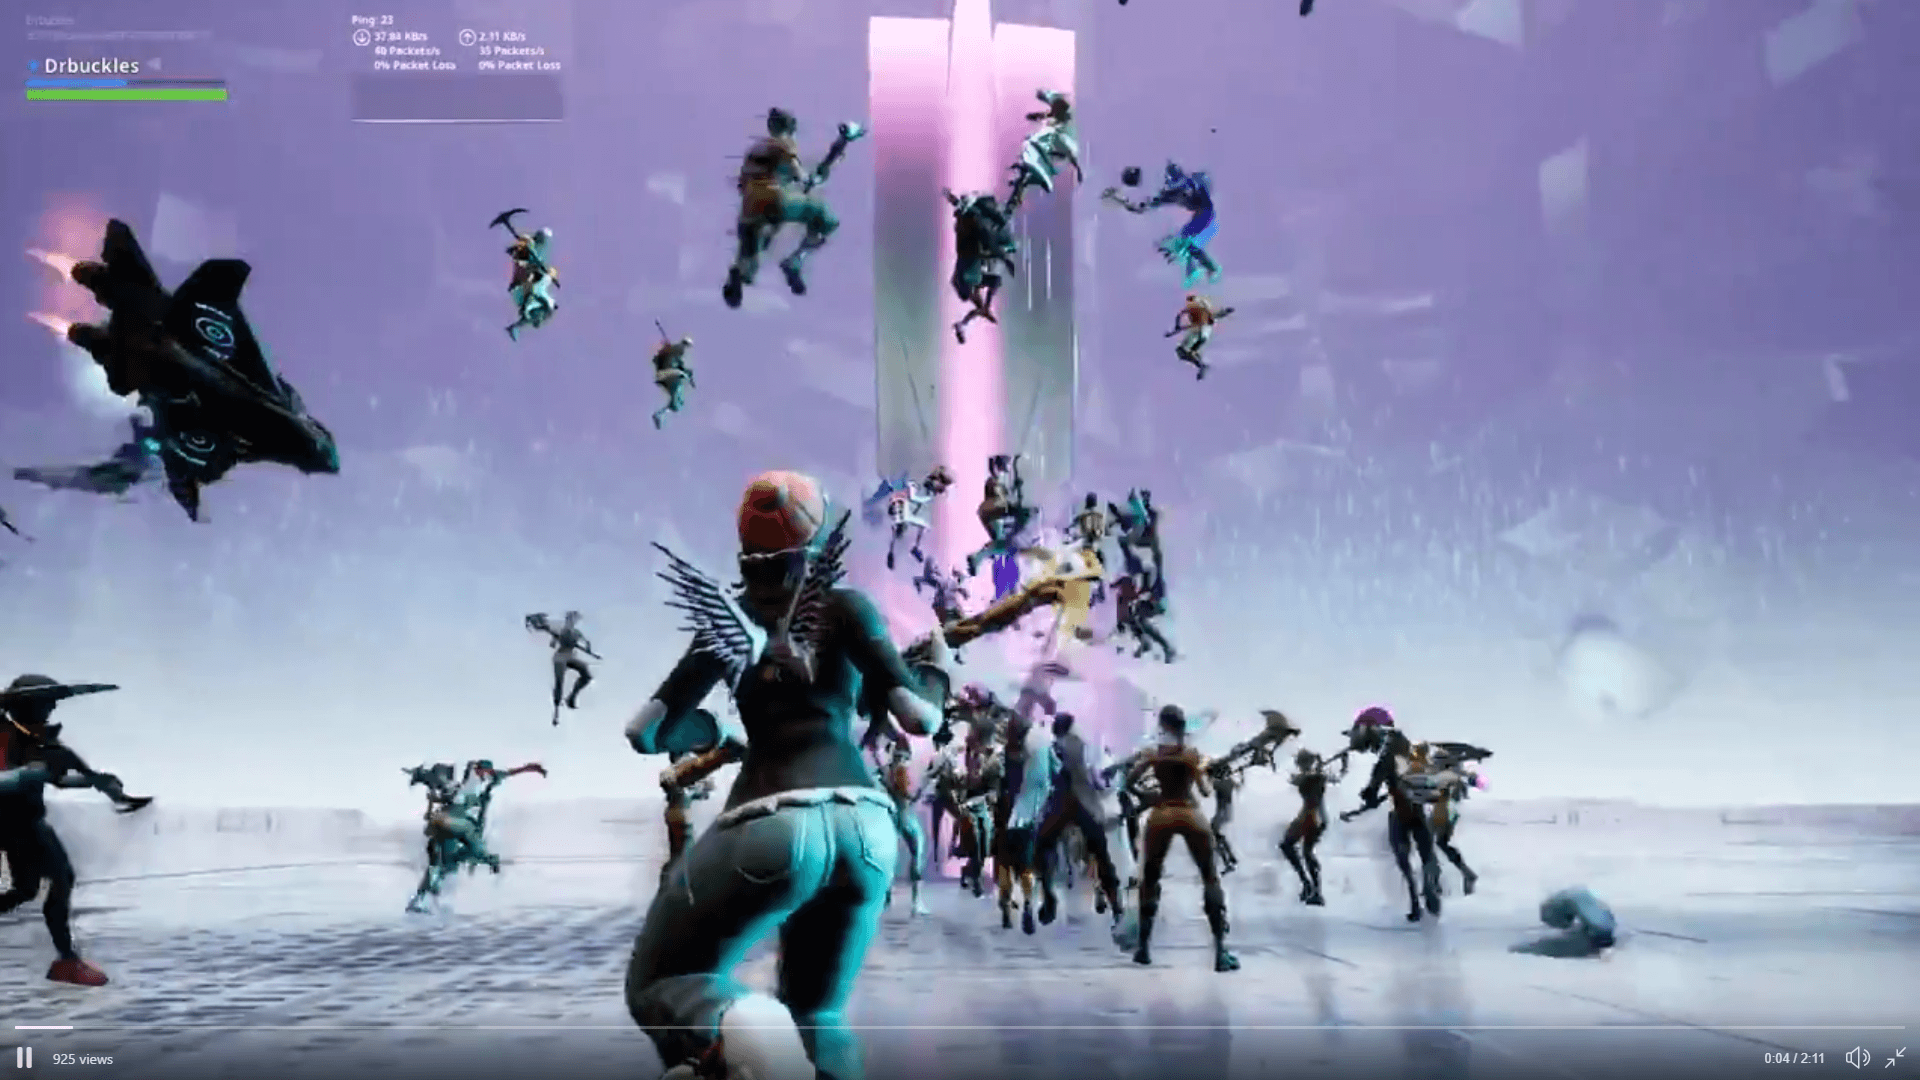 Fortnite Season 9 teaser image tease that Neo Tilted Towers may be